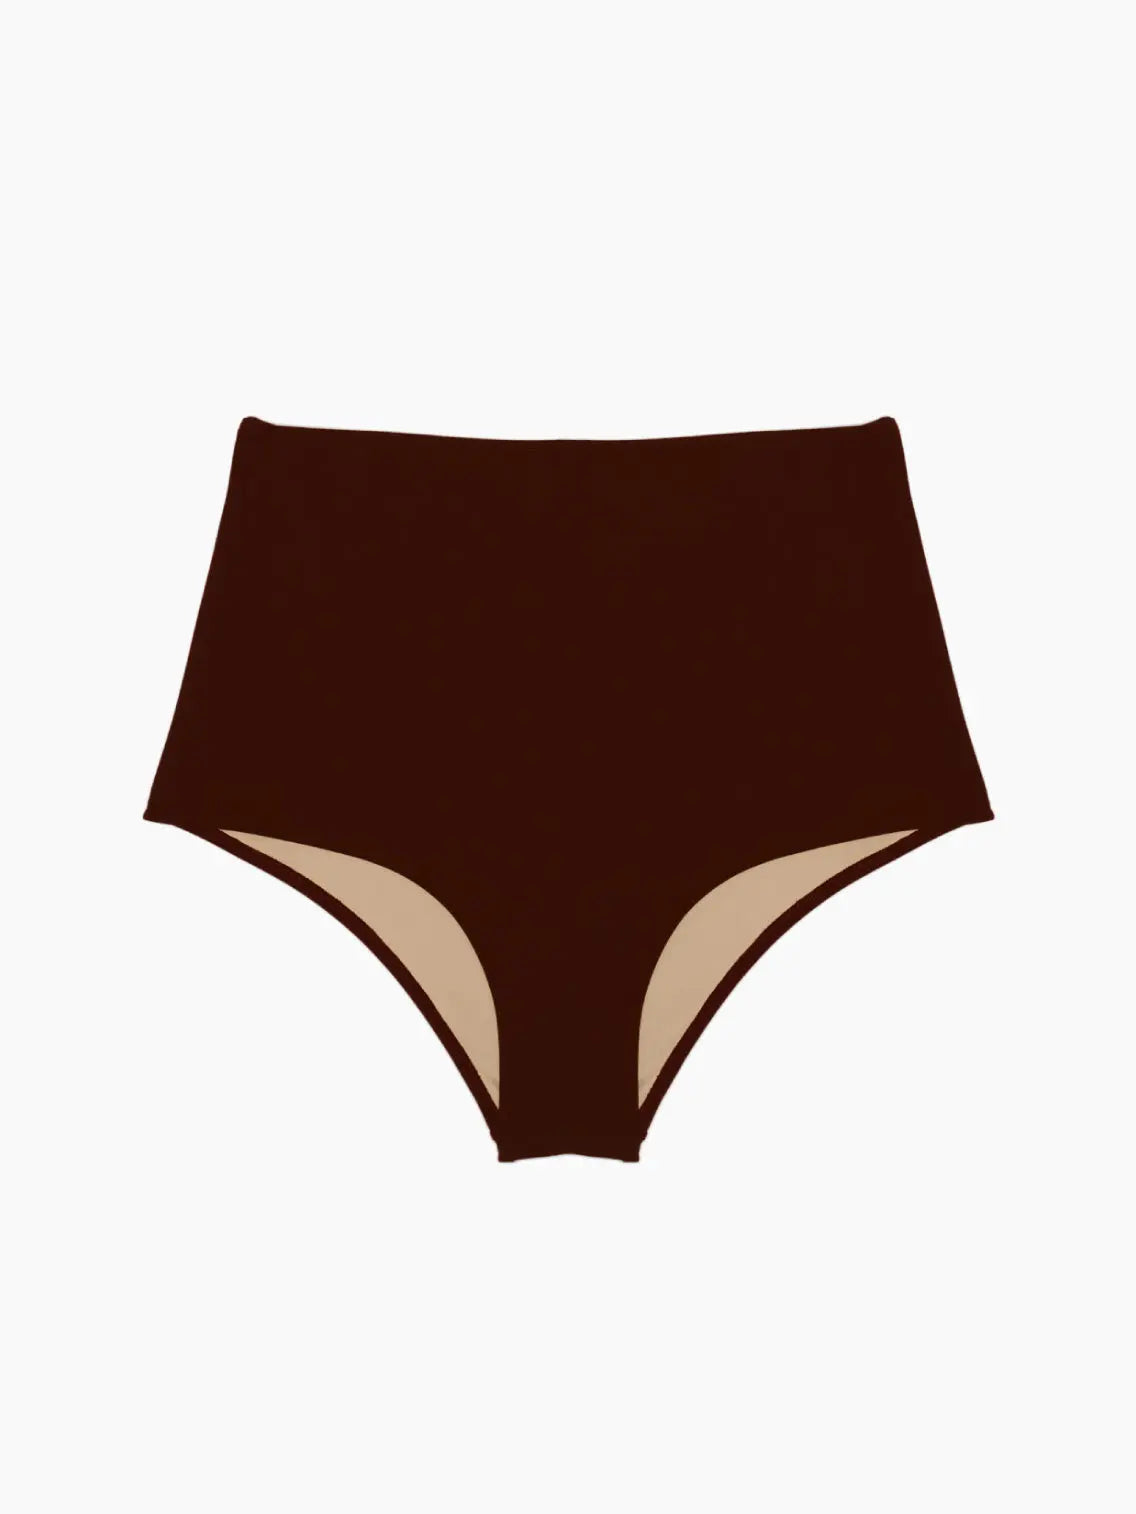 A pair of Lido Undici Bikini High Waist Bottom Brown with a smooth fabric texture, displayed on a plain white background. The undergarment has a simple and classic design with high-cut leg openings, available exclusively at BassalStore.